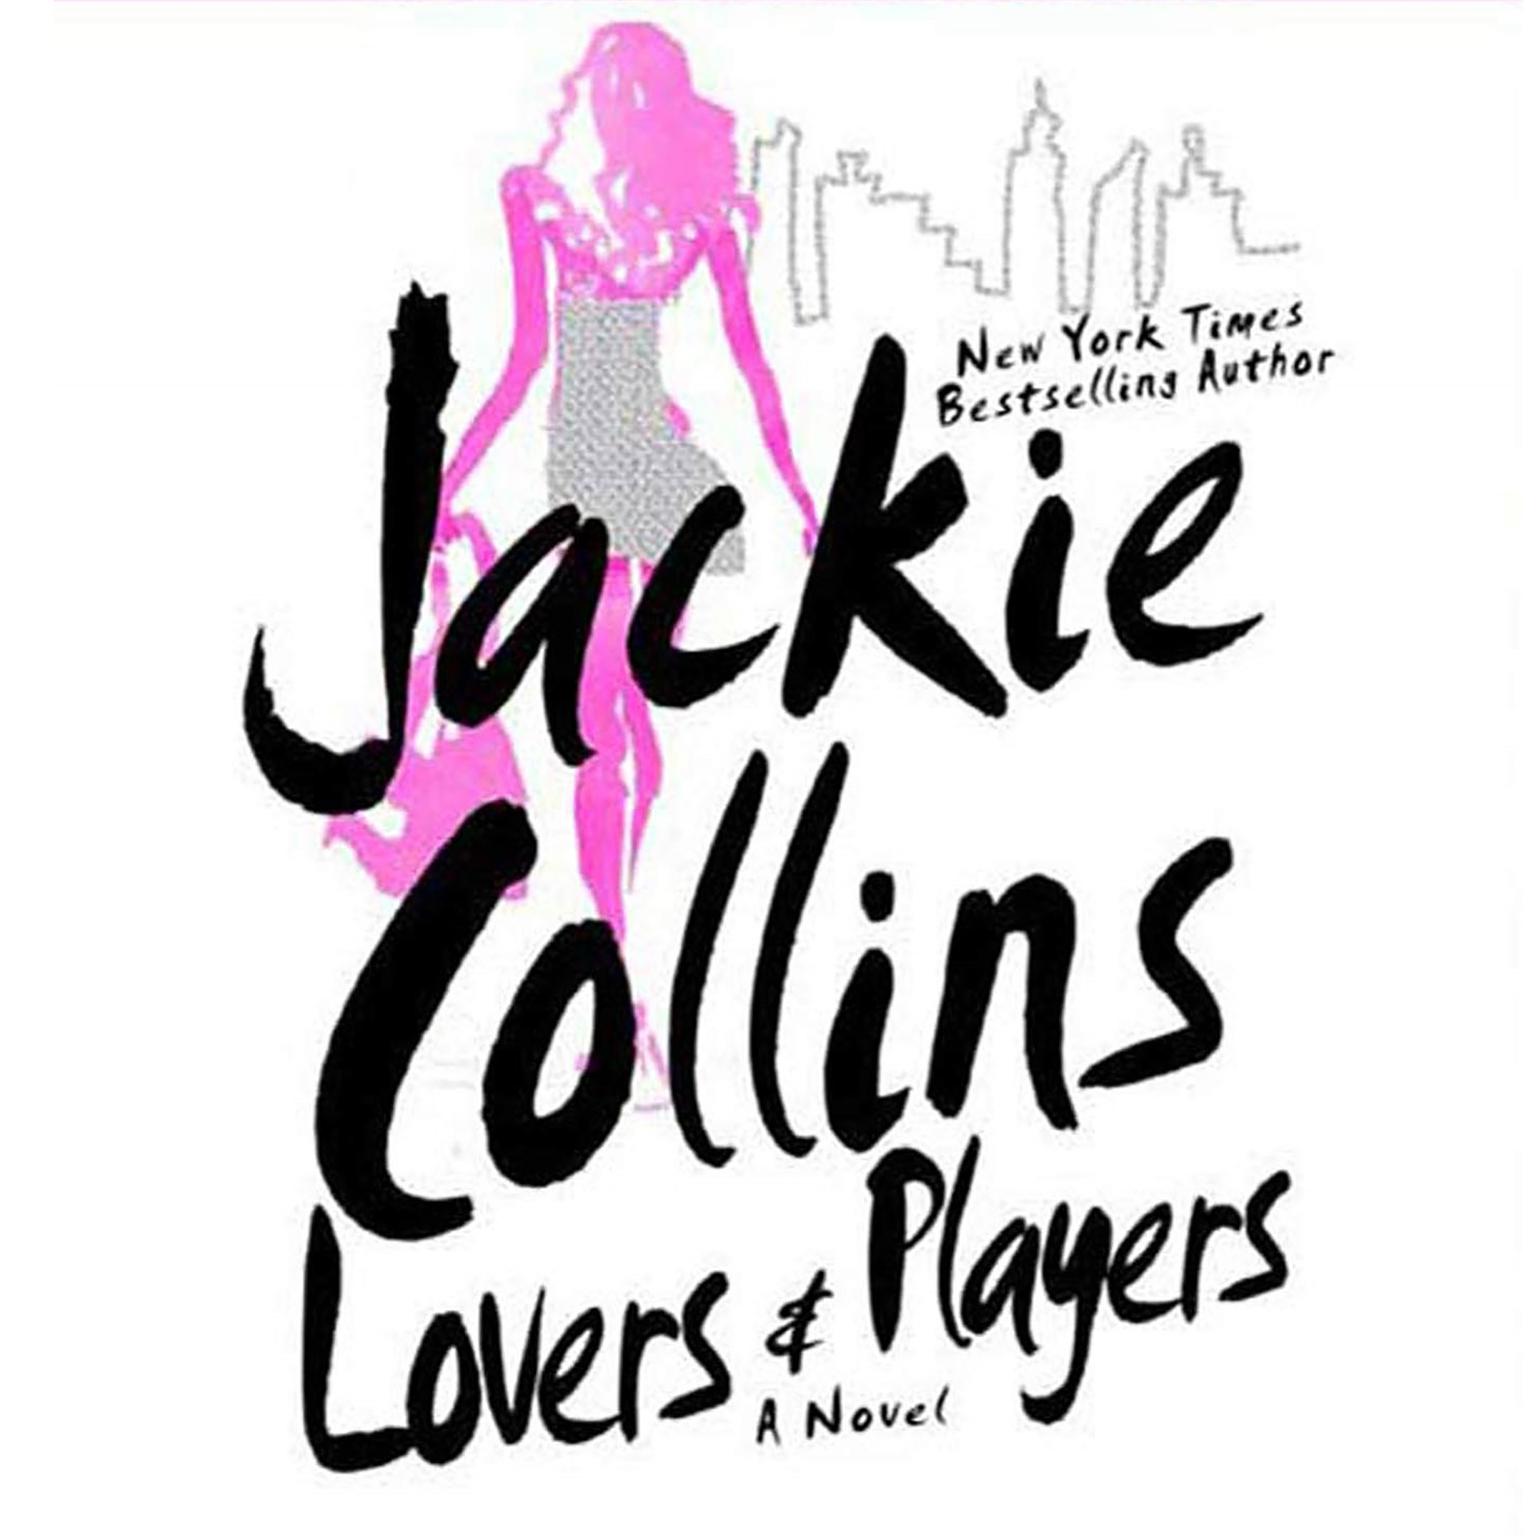 Lovers & Players (Abridged): A Novel Audiobook, by Jackie Collins